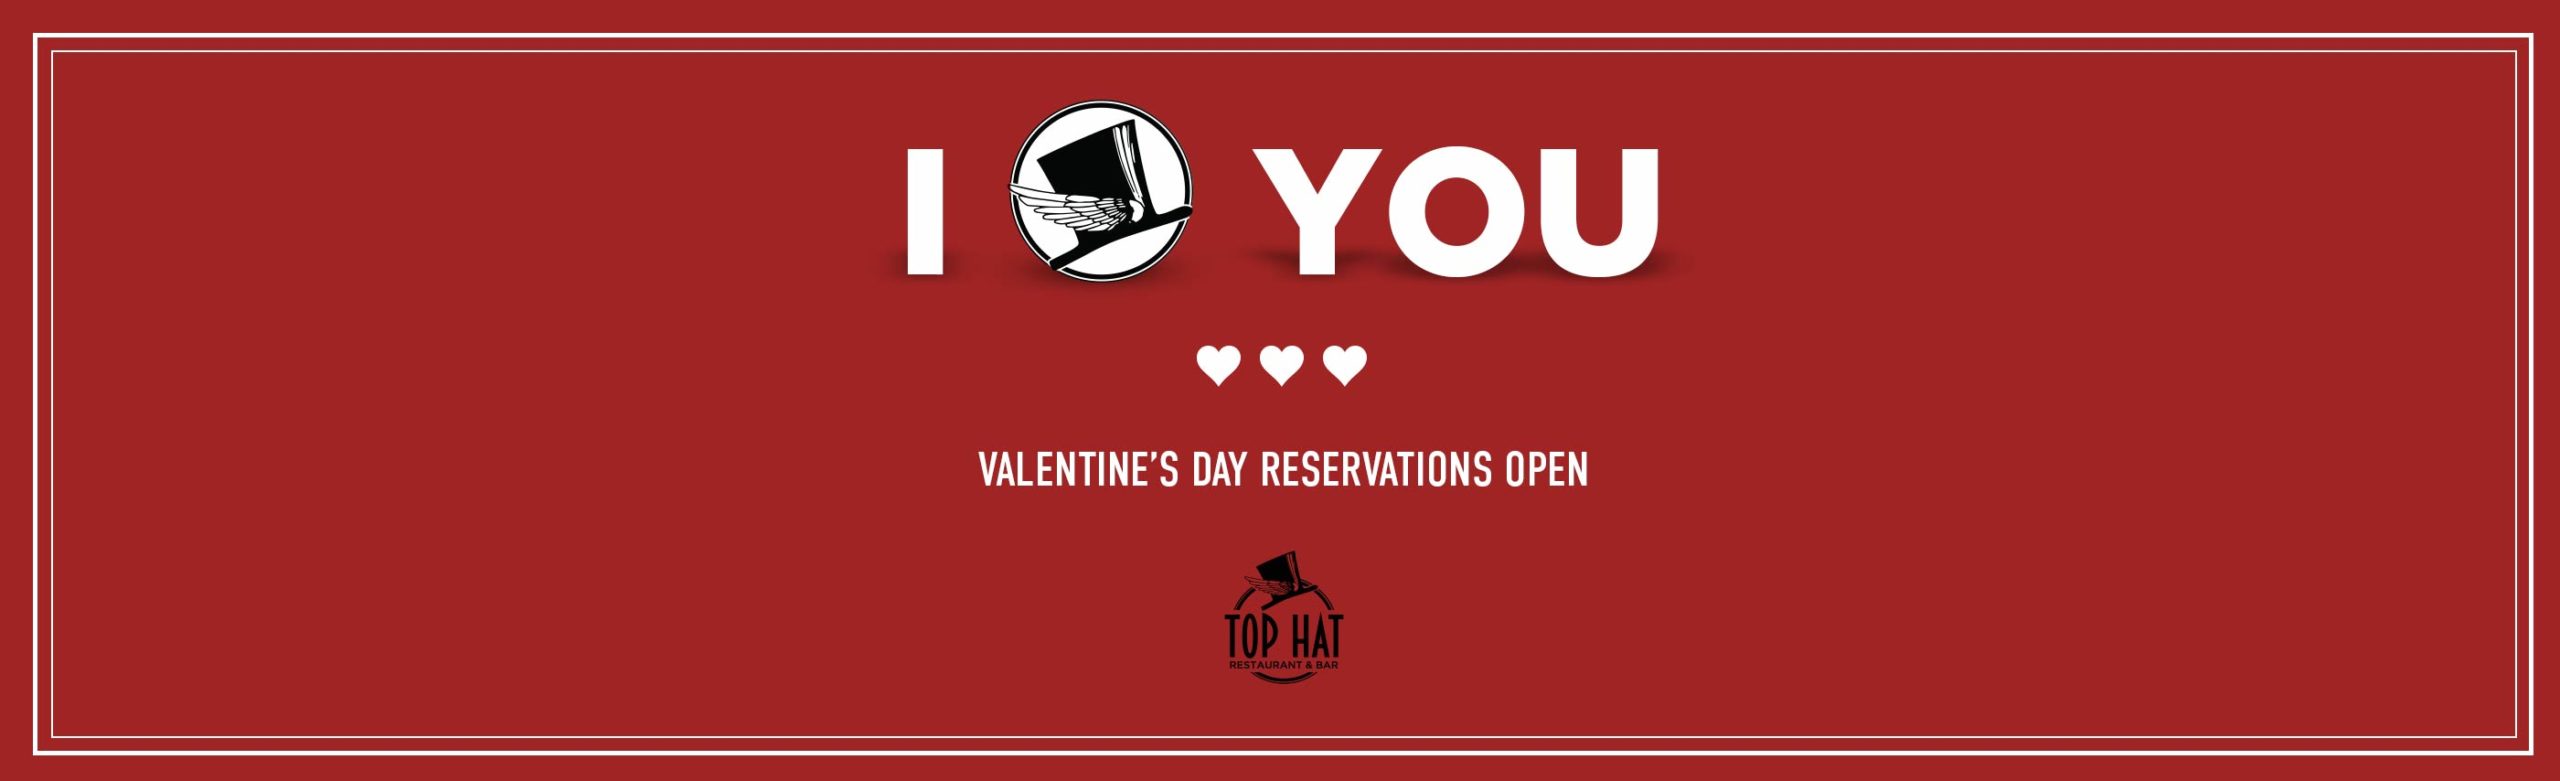 Table for Two Rendezvous: Top Hat Accepts Reservations and Creates Special Pairings for Valentine’s Day Image